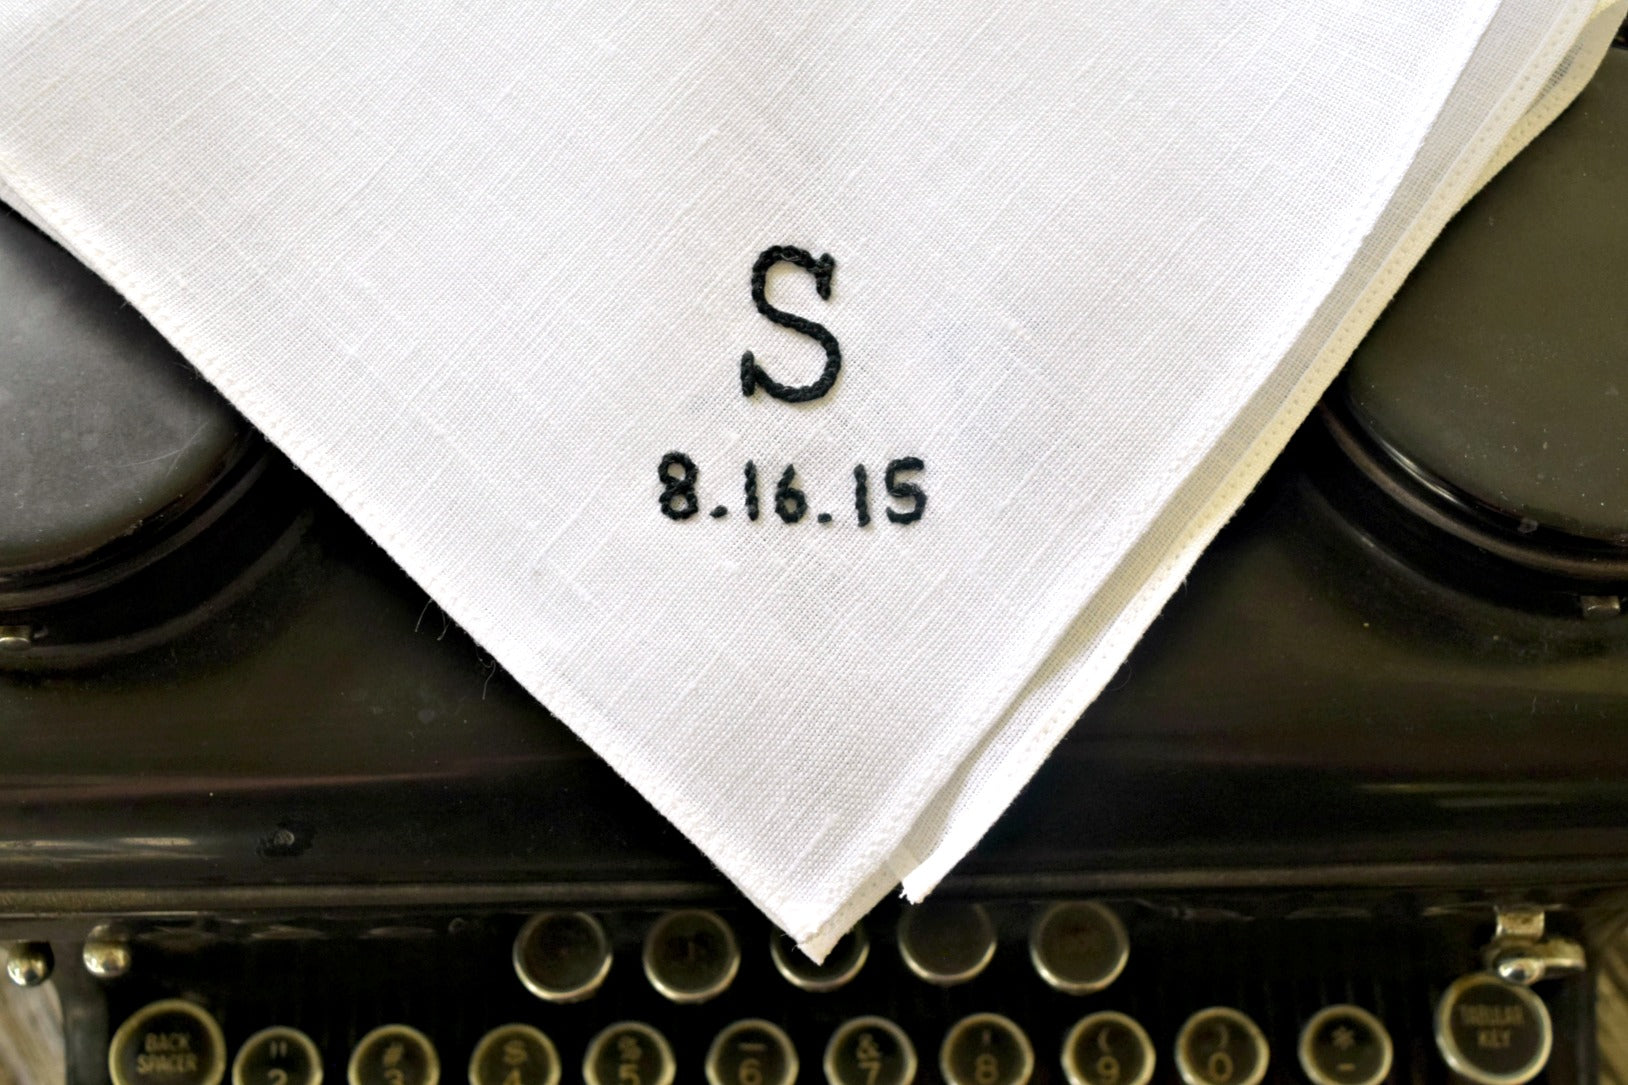 Hand embroidered pocket square with monogram and date in typewriter font